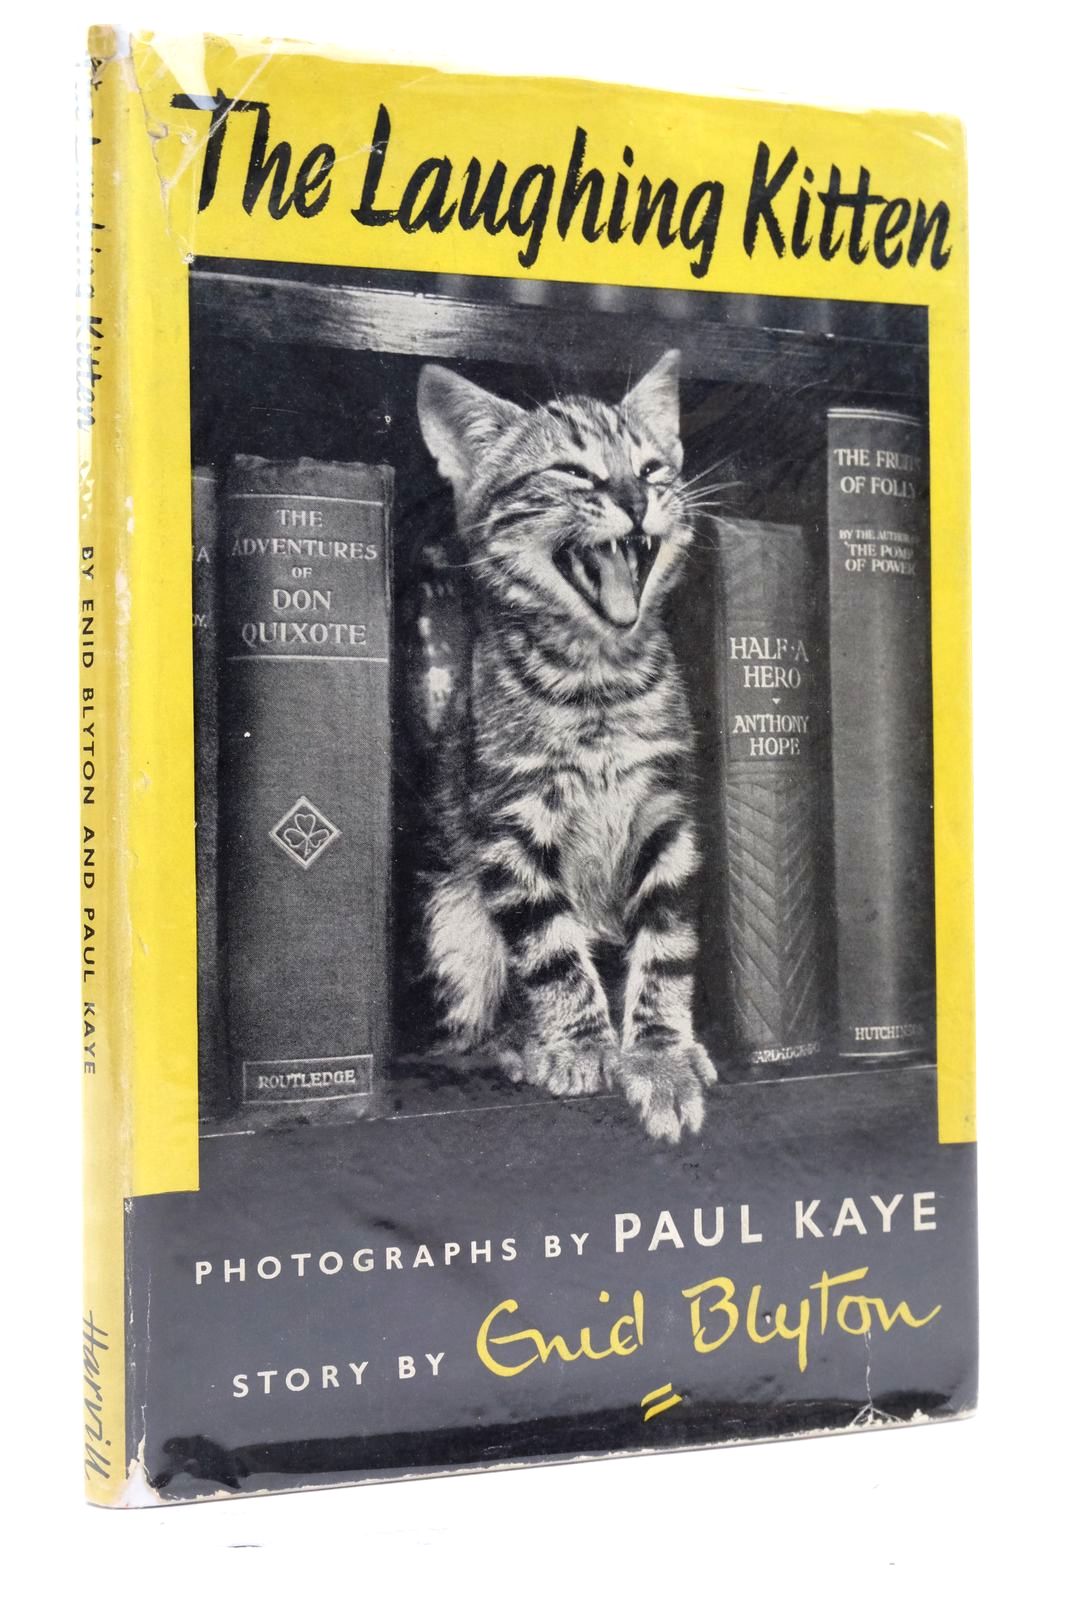 Photo of THE LAUGHING KITTEN written by Blyton, Enid illustrated by Kaye, Paul published by The Harvill Press (STOCK CODE: 2137024)  for sale by Stella & Rose's Books